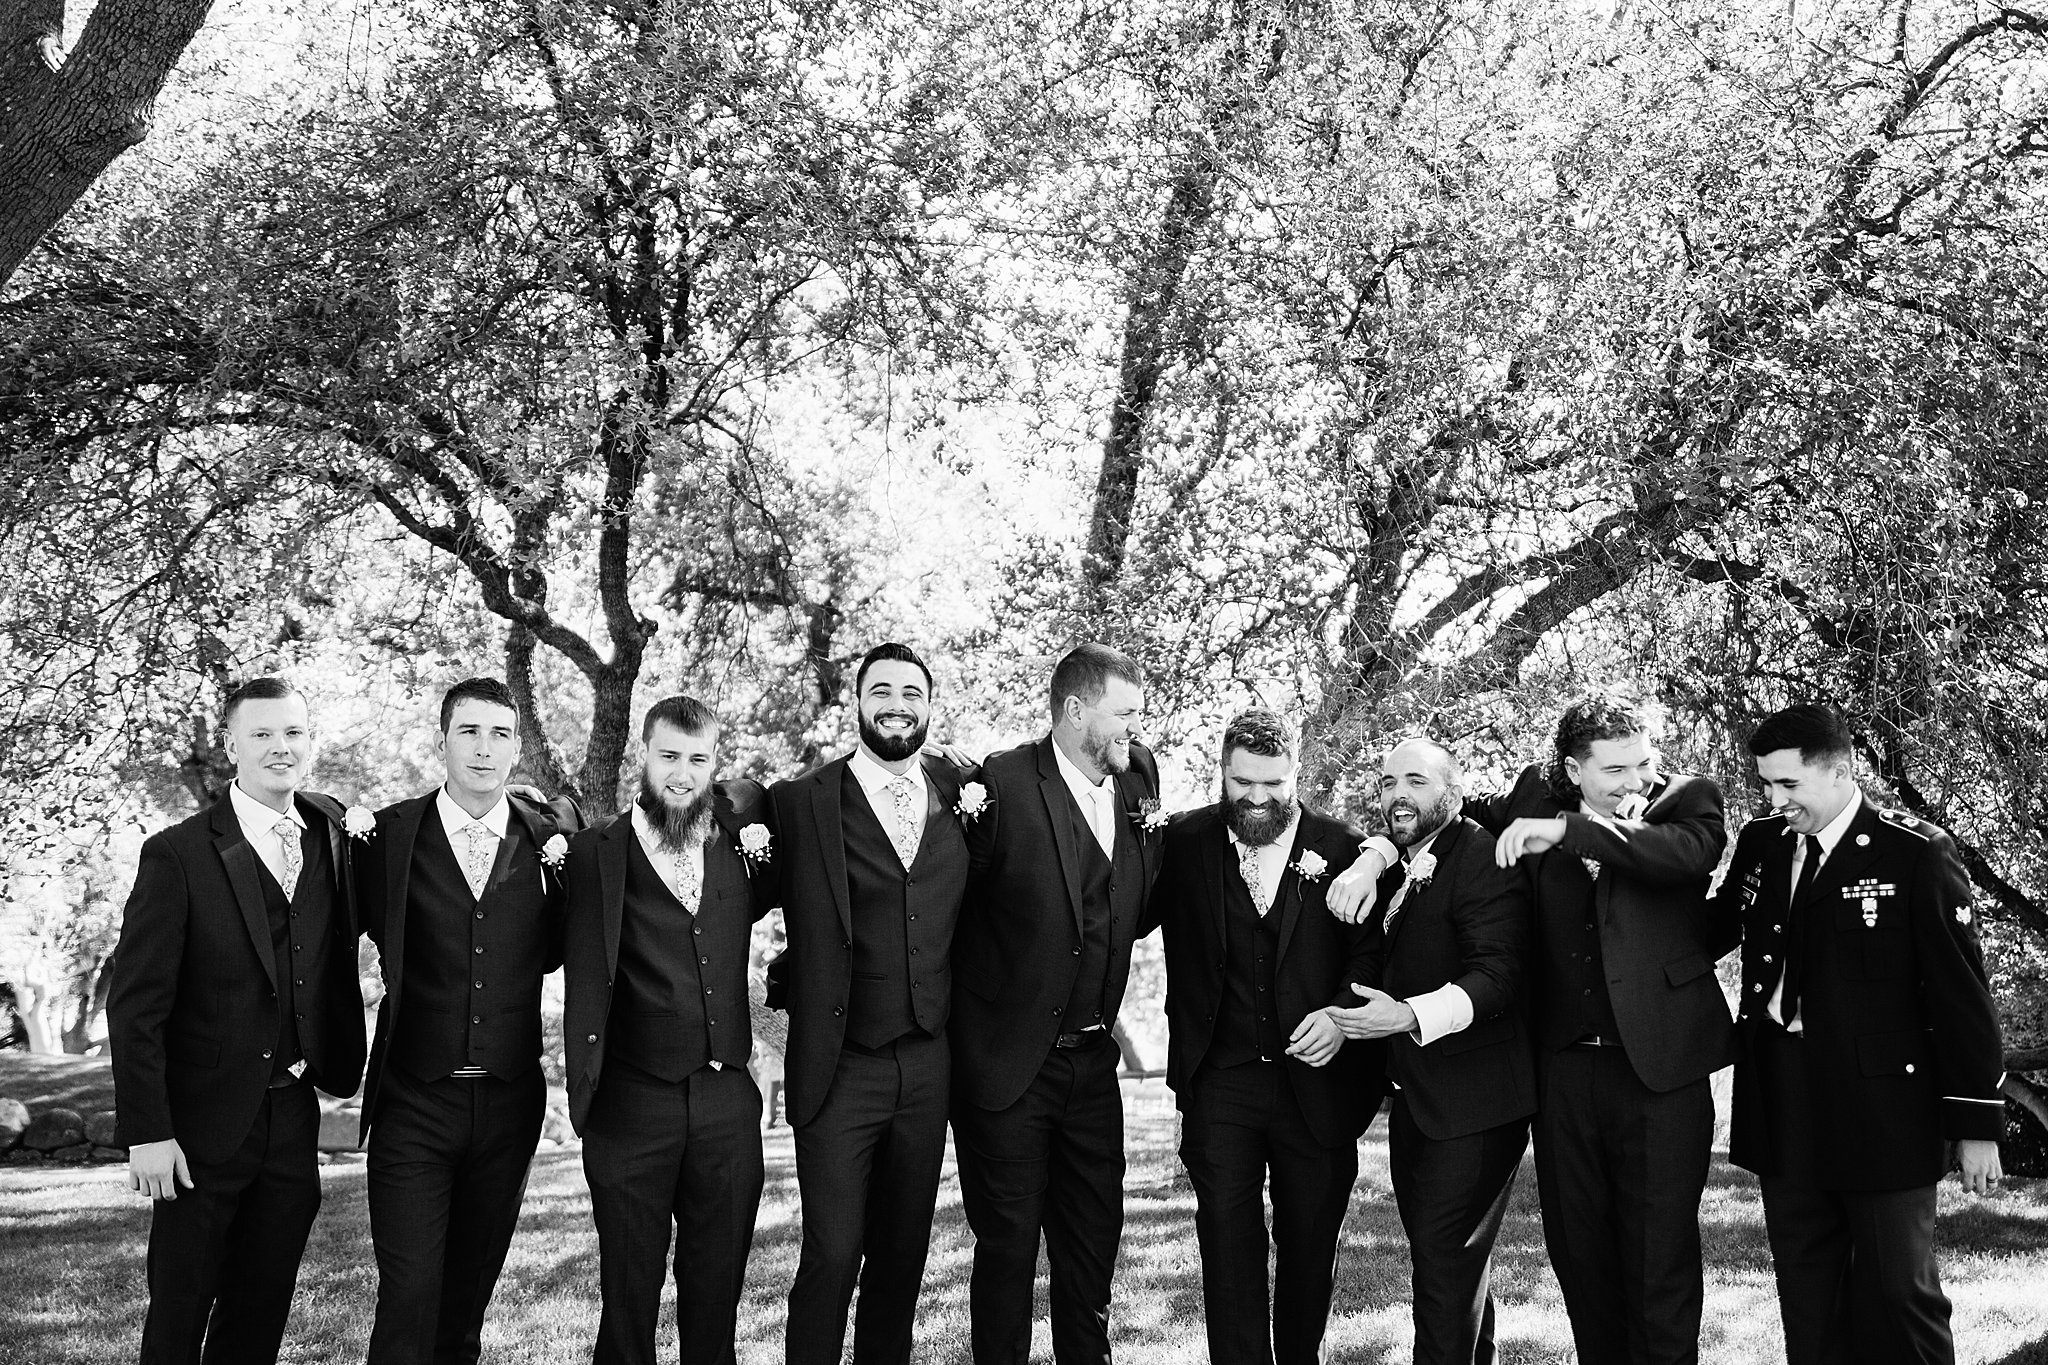 Groom and groomsmen laughing together at Van Dickson Ranch wedding by Skull Valley wedding photographer PMA Photography.